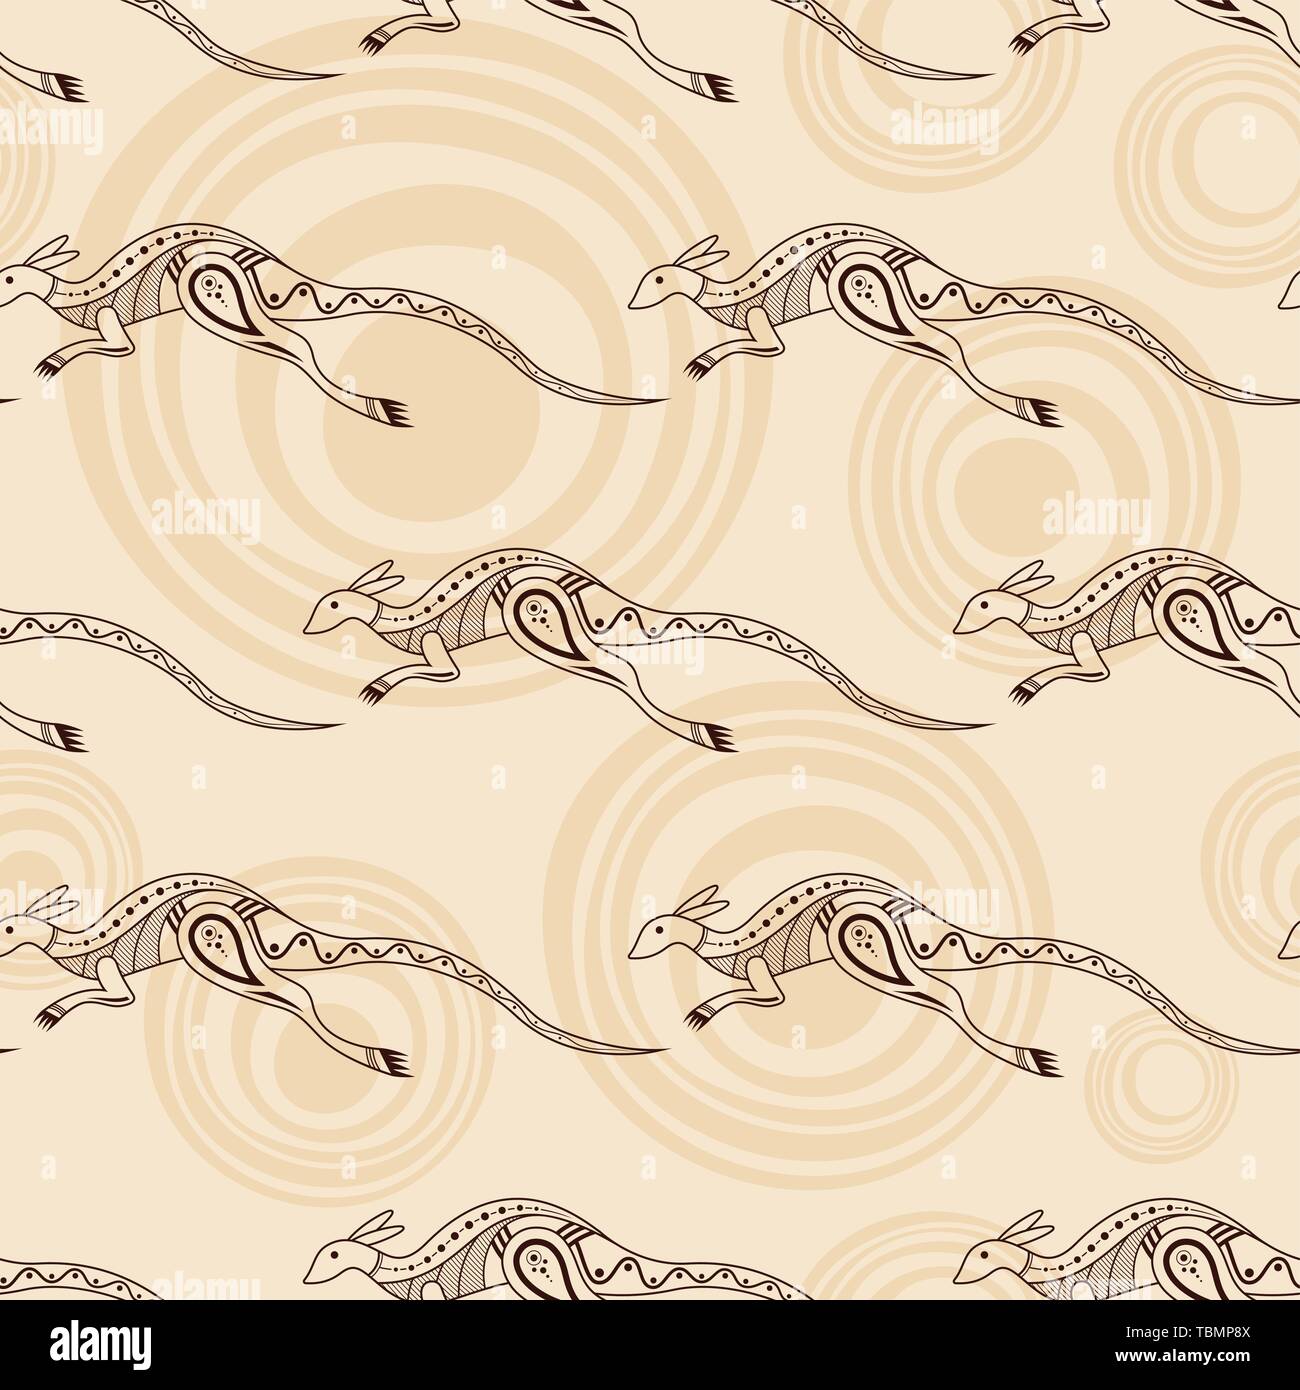 Seamless pattern of kangaroos silhouettes with abstract circles on background. Australian art. Aboriginal painting style. Vector color background. Stock Vector